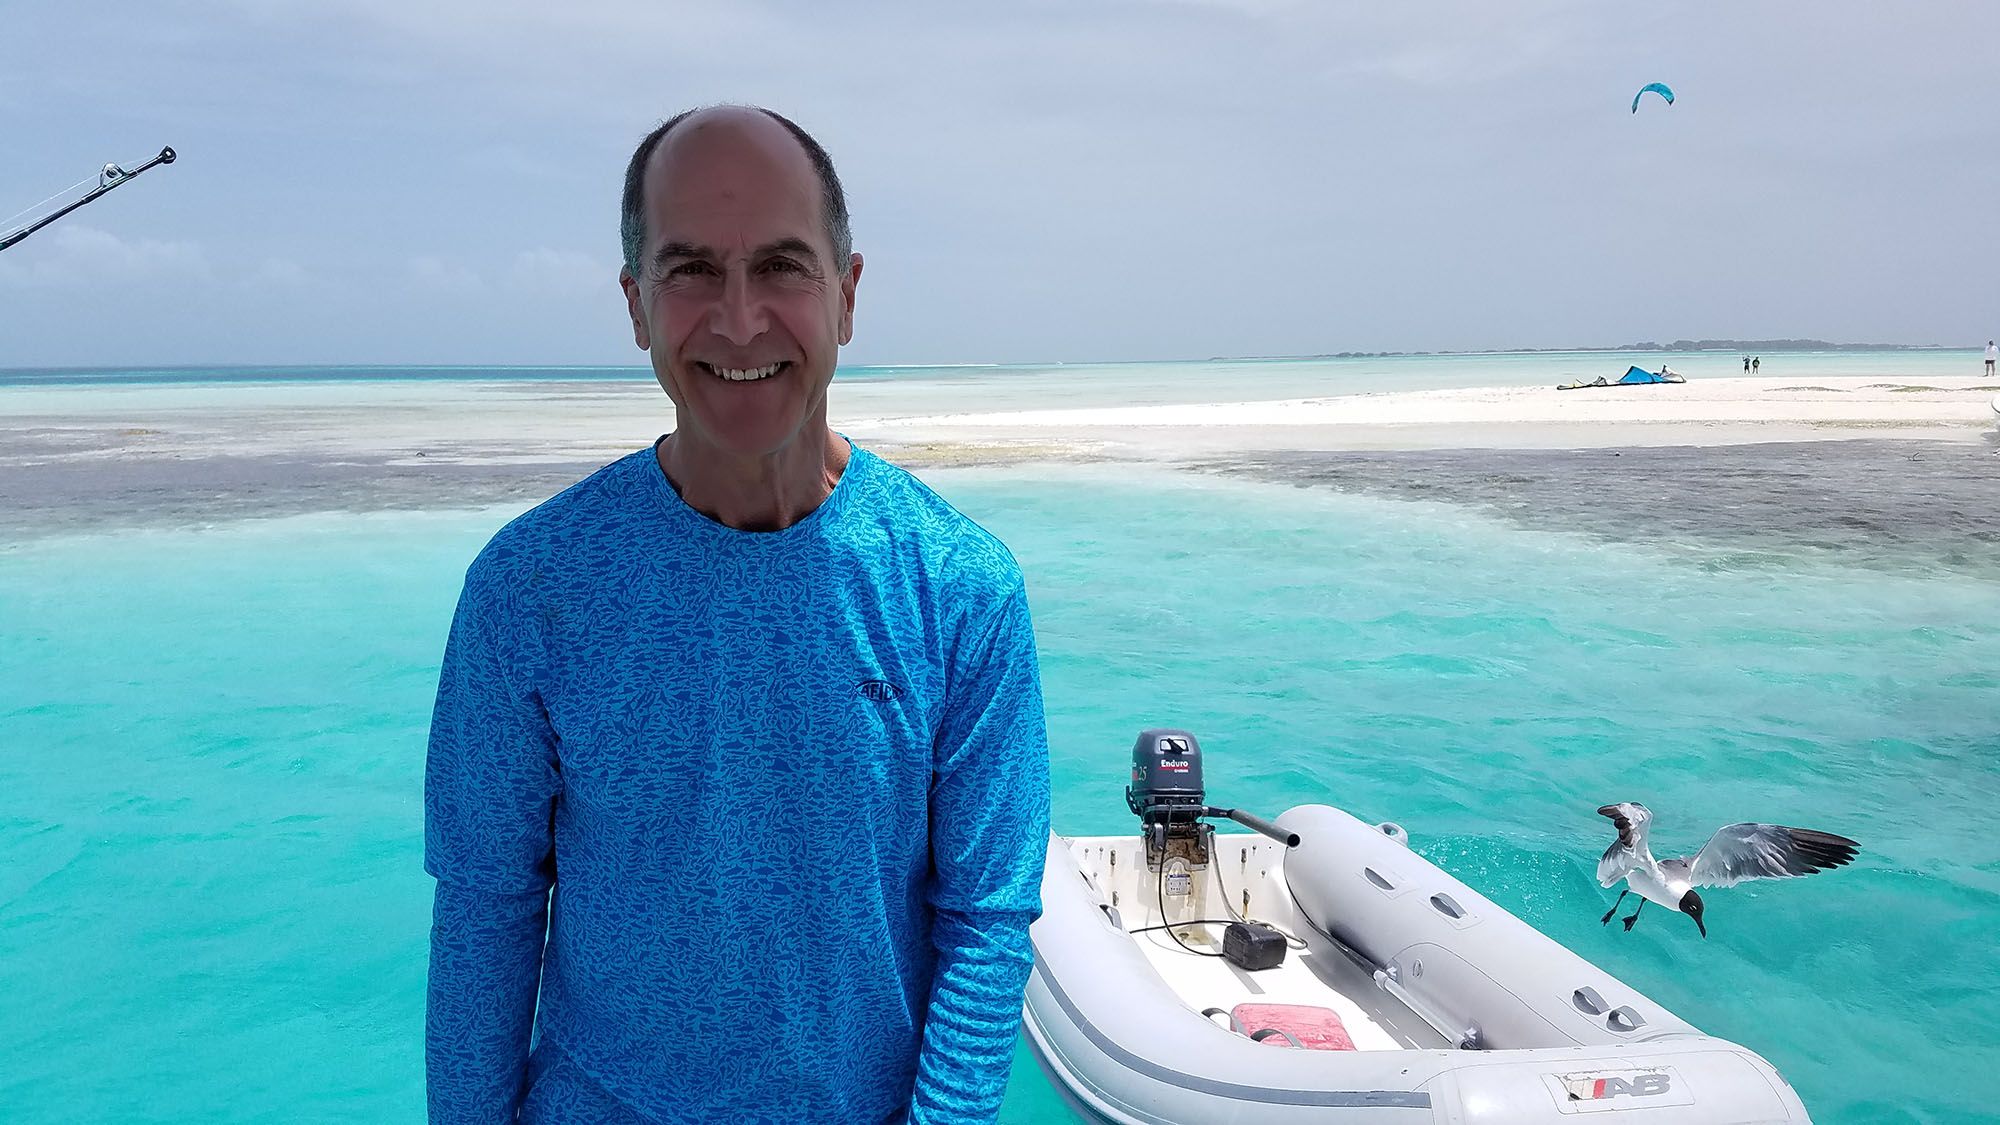 Frank Müller-Karger’s captivating career path went from a budding interest in whale research to pioneering work in studying phytoplankton blooms via satellite technology.